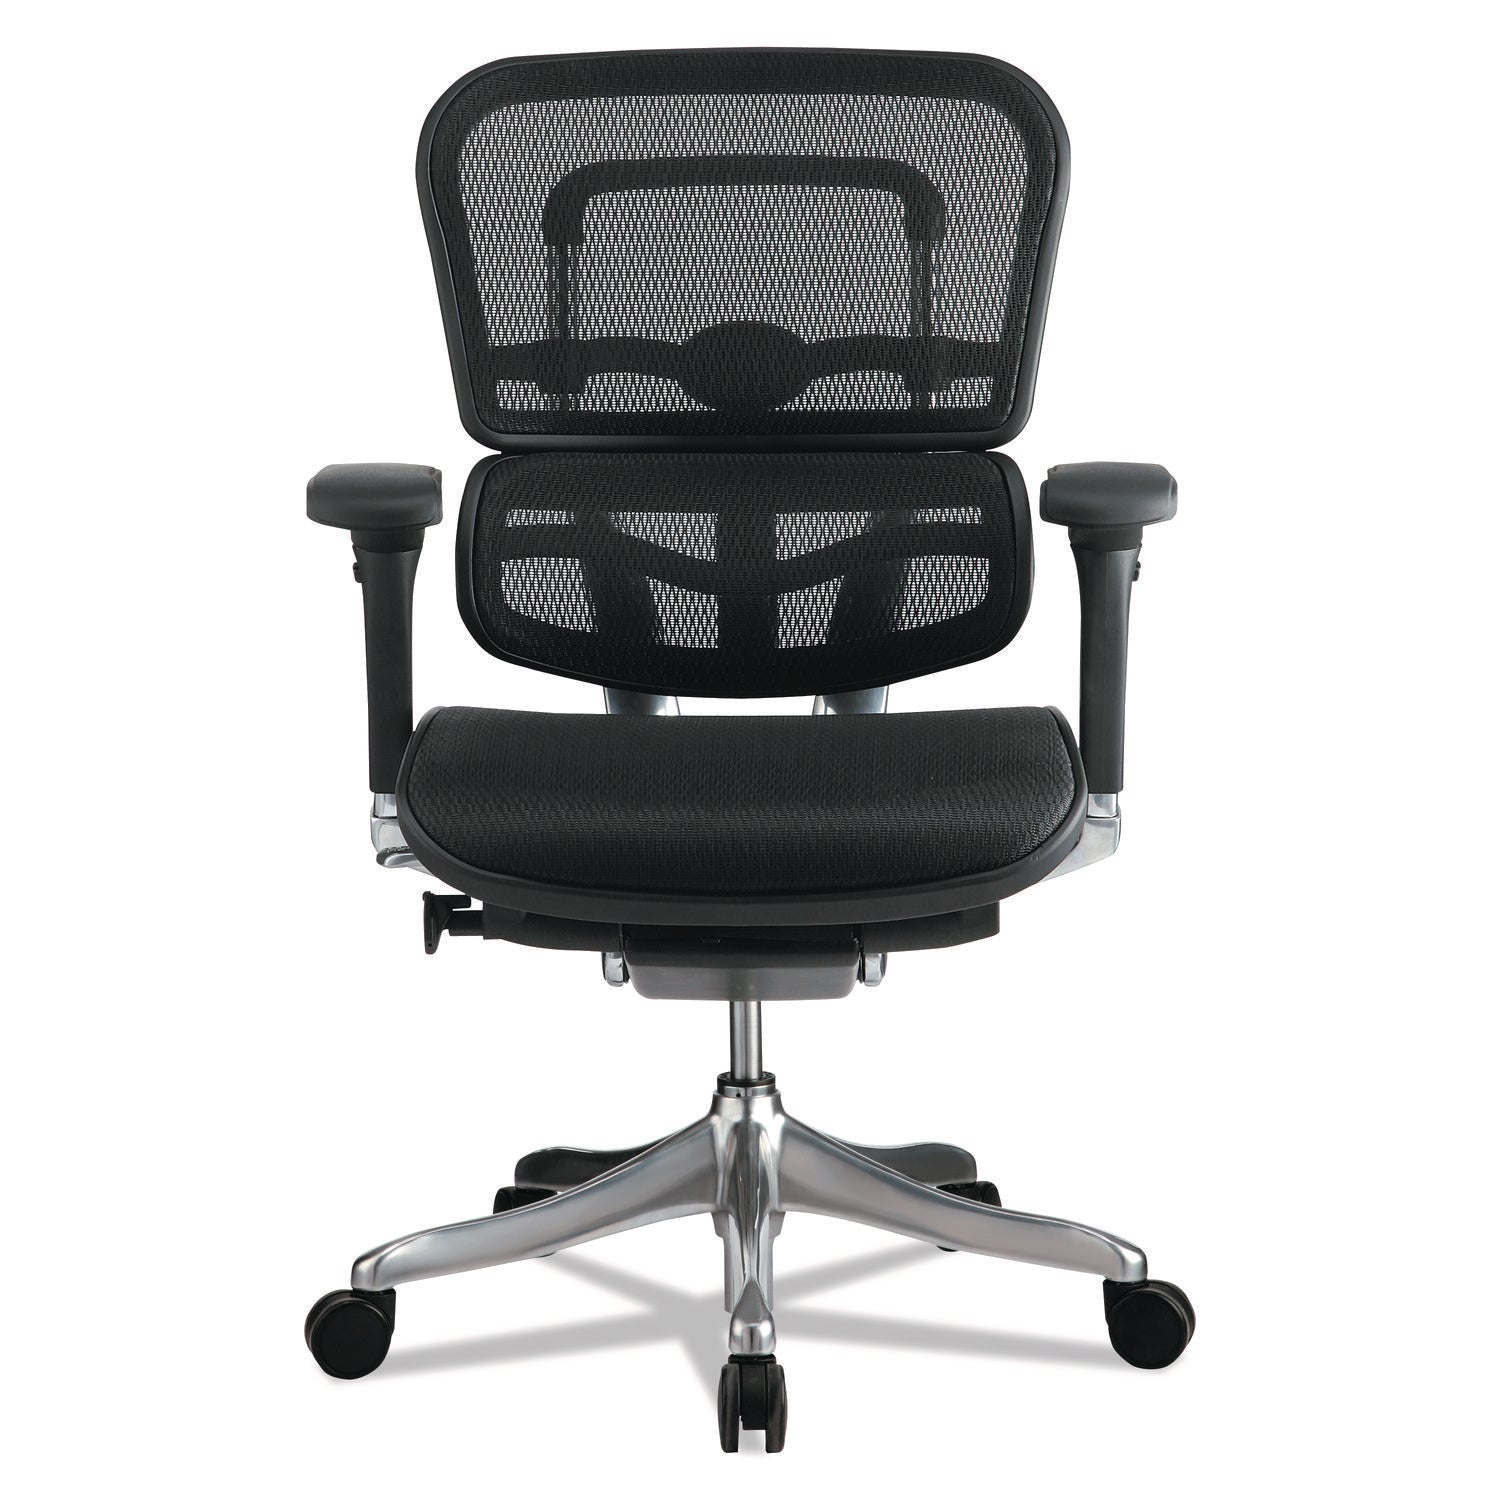 ergohuman-elite-mid-back-mesh-chair-supports-up-to-250-lb-1811-to-2165-seat-height-black_eutme5ergltn15 - 2